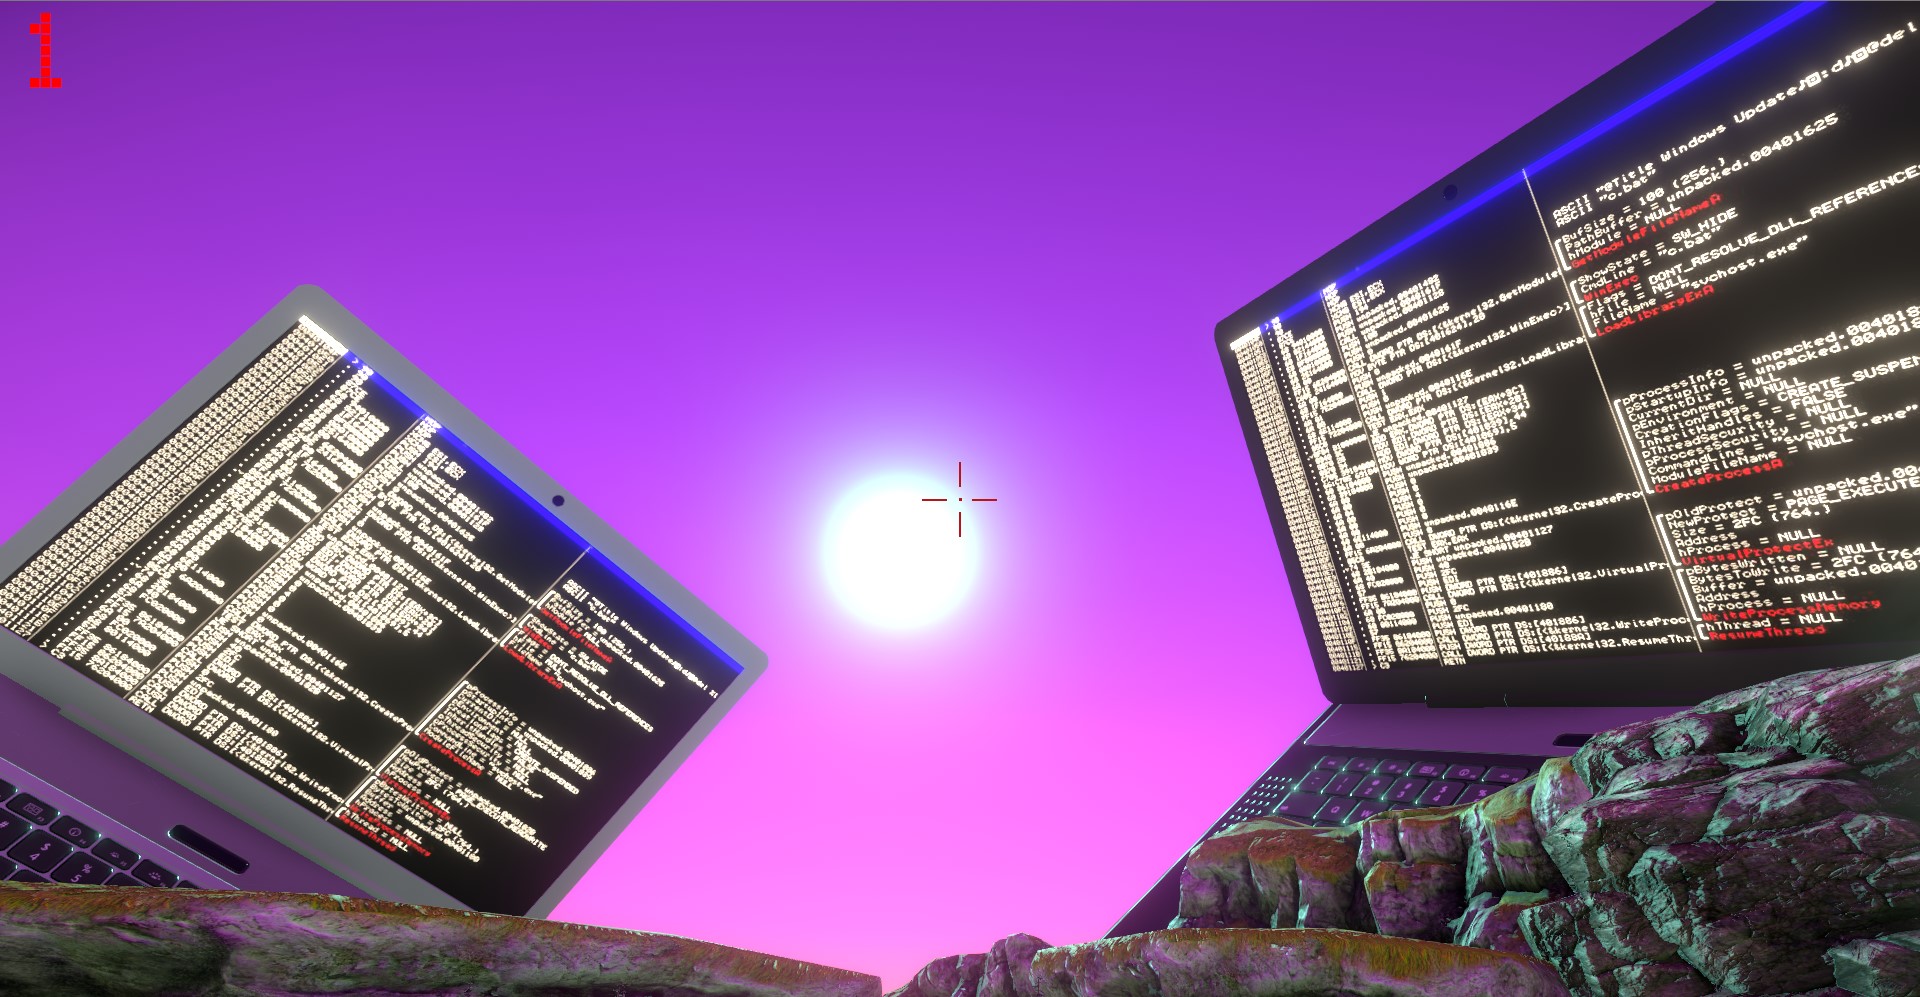 Screenshot from Programmer Dater of a purple sky with giant laptops looming over the landscape